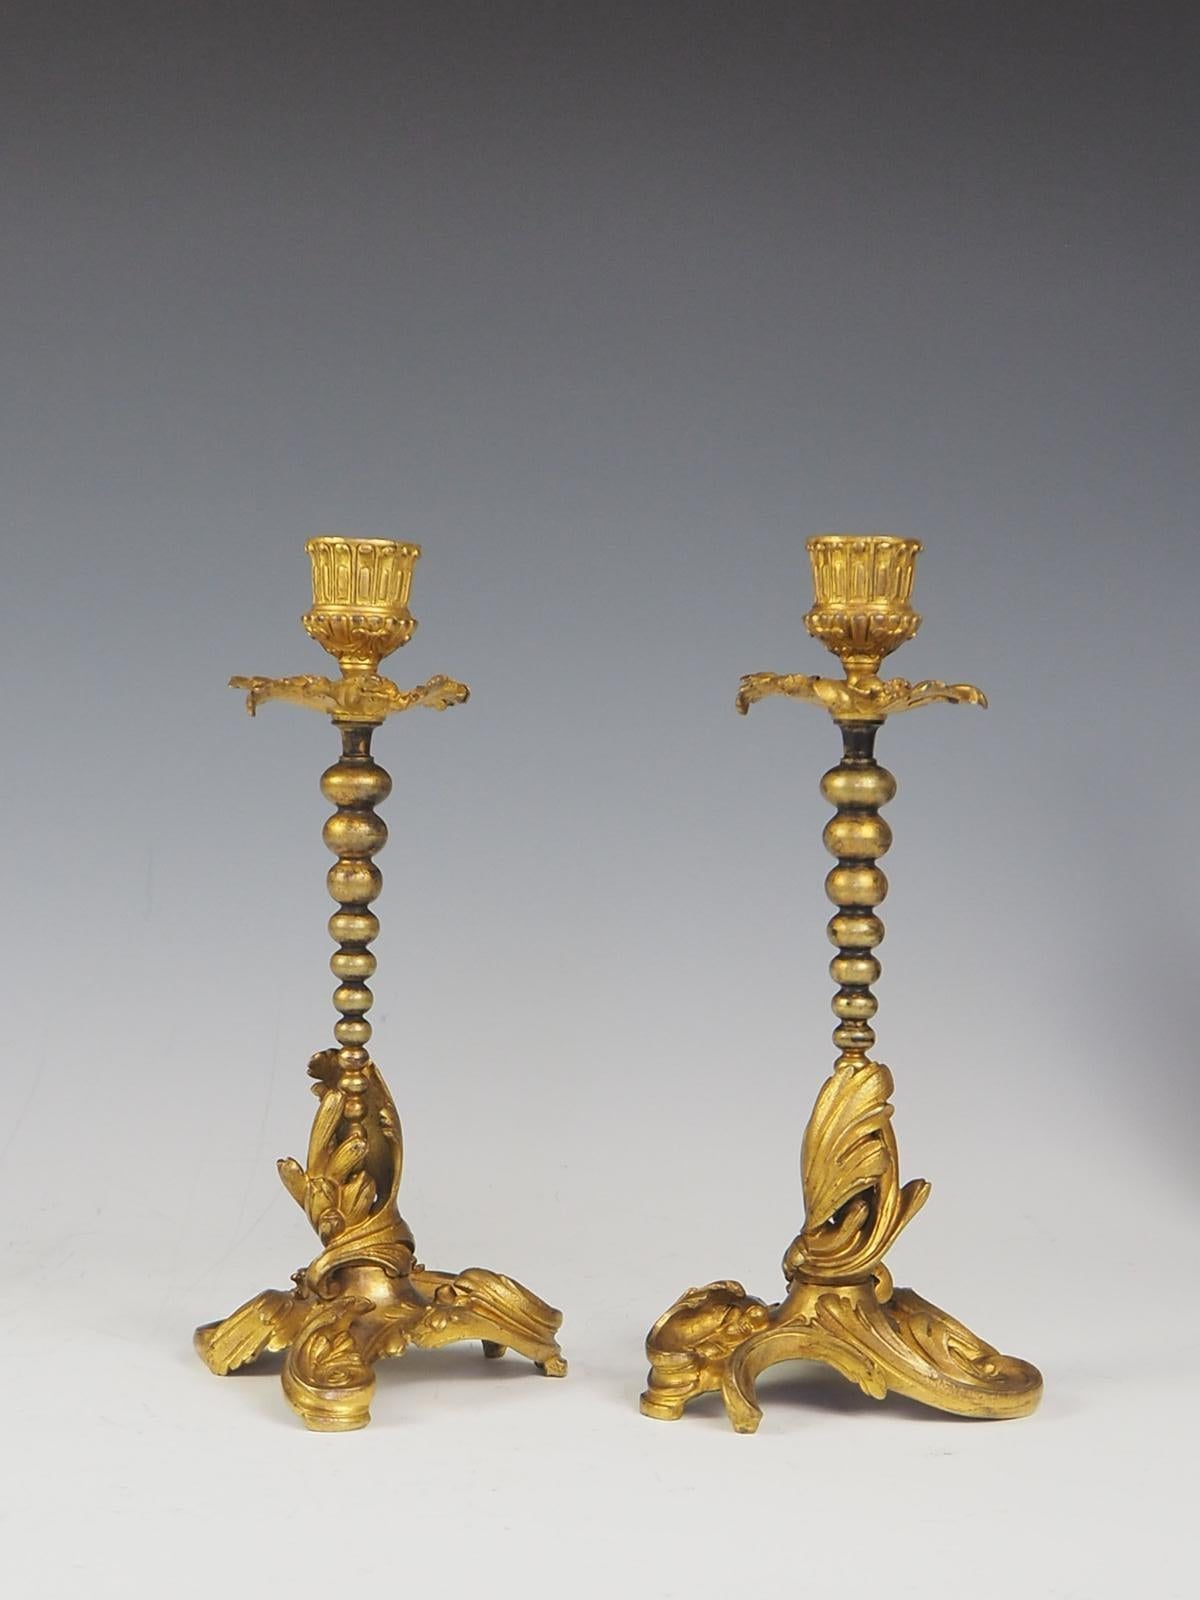 A pair of Henri Picard gilt bronze candlesticks circa 1850 Stamped. H. PICARD.

Napoleon III Ormolu Gilt Bronze candlesticks with beautiful detailing, acanthus leaves wrapping the base of the shaft and fine beads leading up to the acanthus leaf